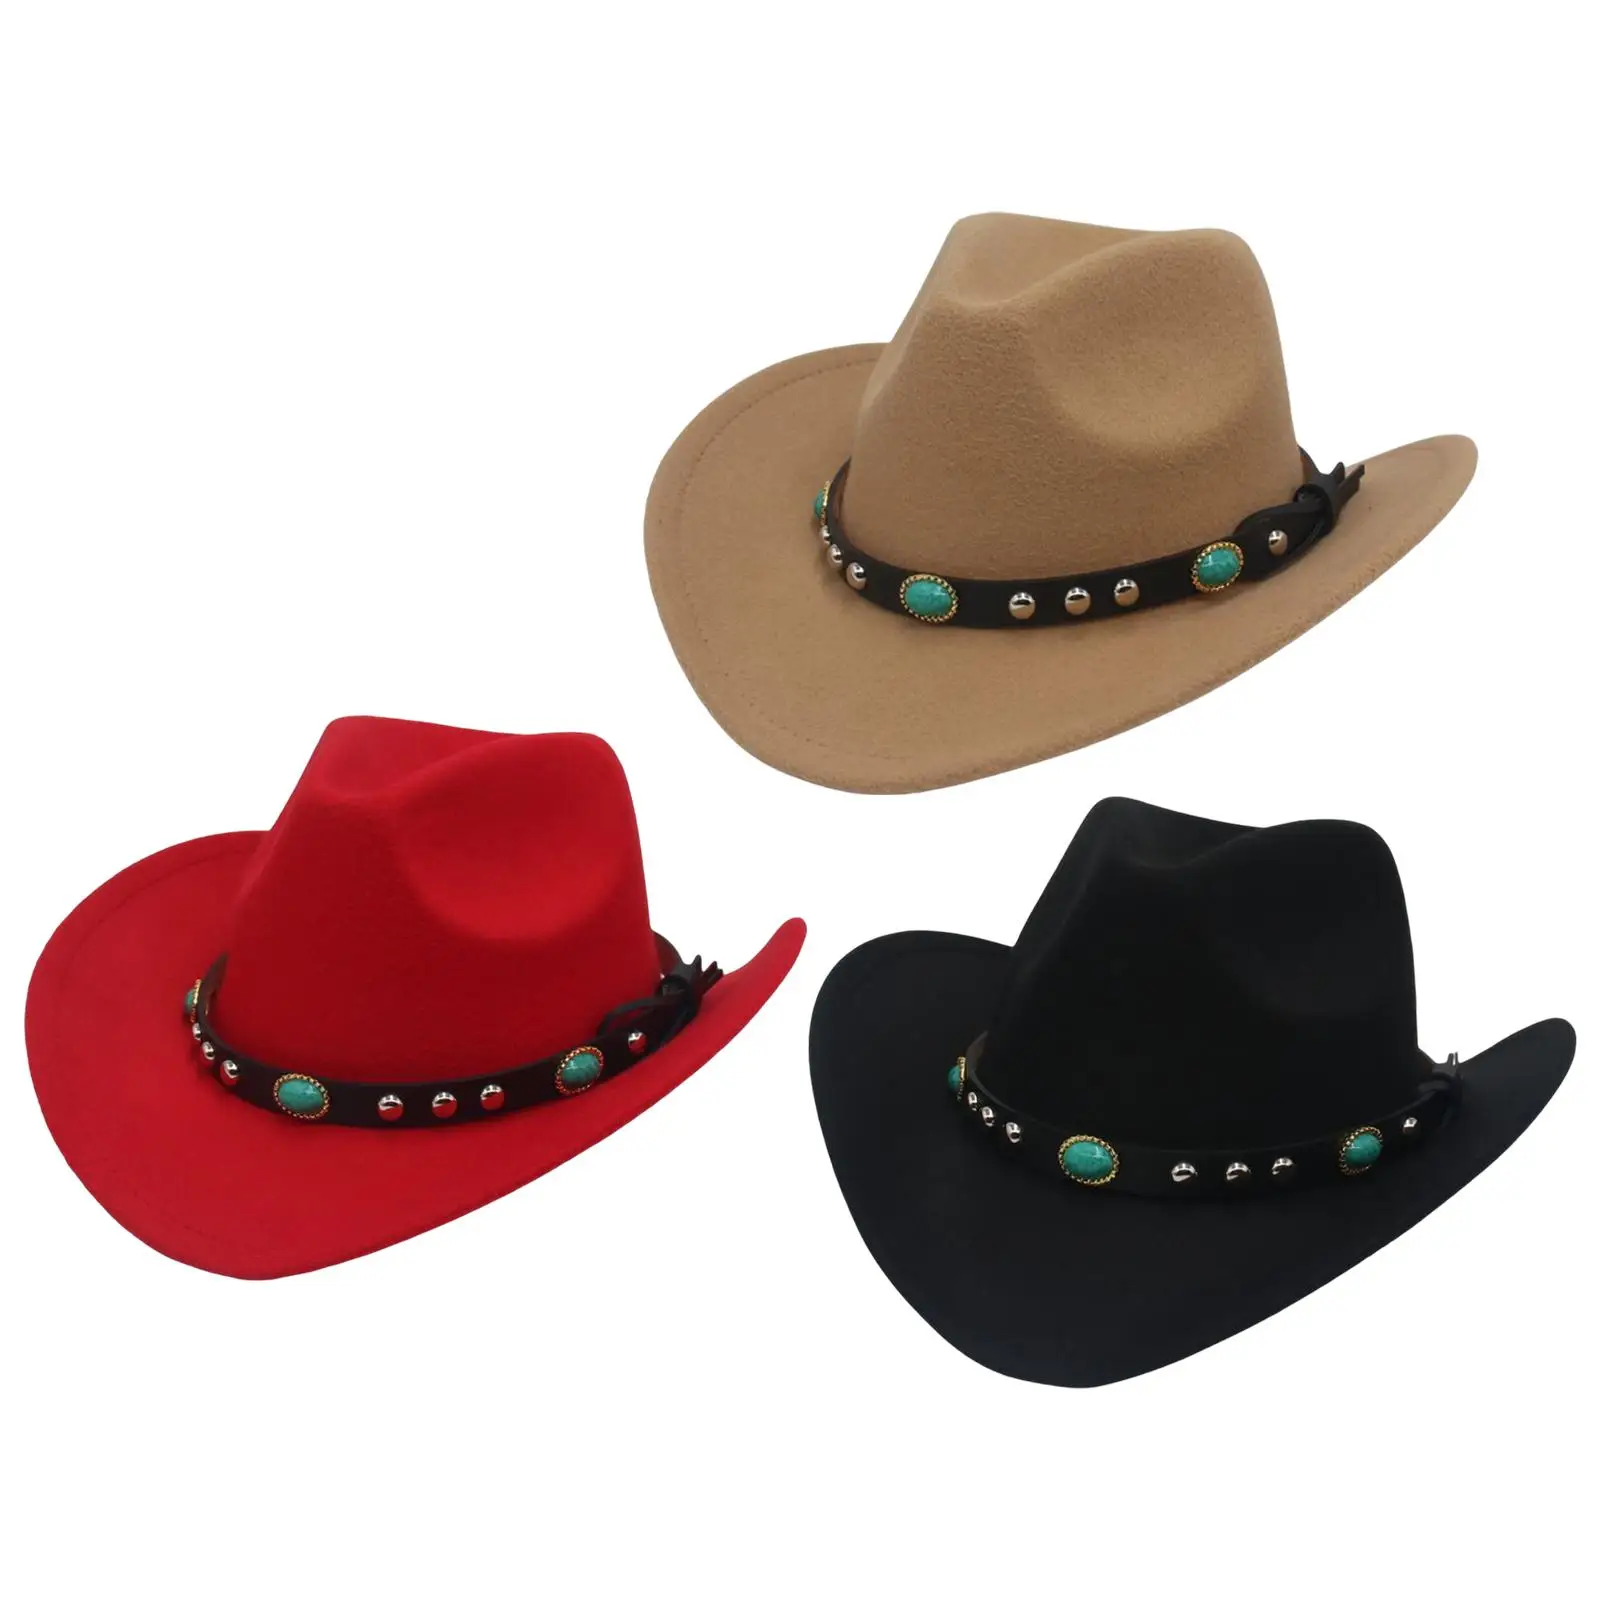 Unisex Felt Western Cowboy Hat Wide Brim Sunhat with Belt Buckle Photo Props Panama Cowgirl Hat for Adults Summer Beach Outdoor